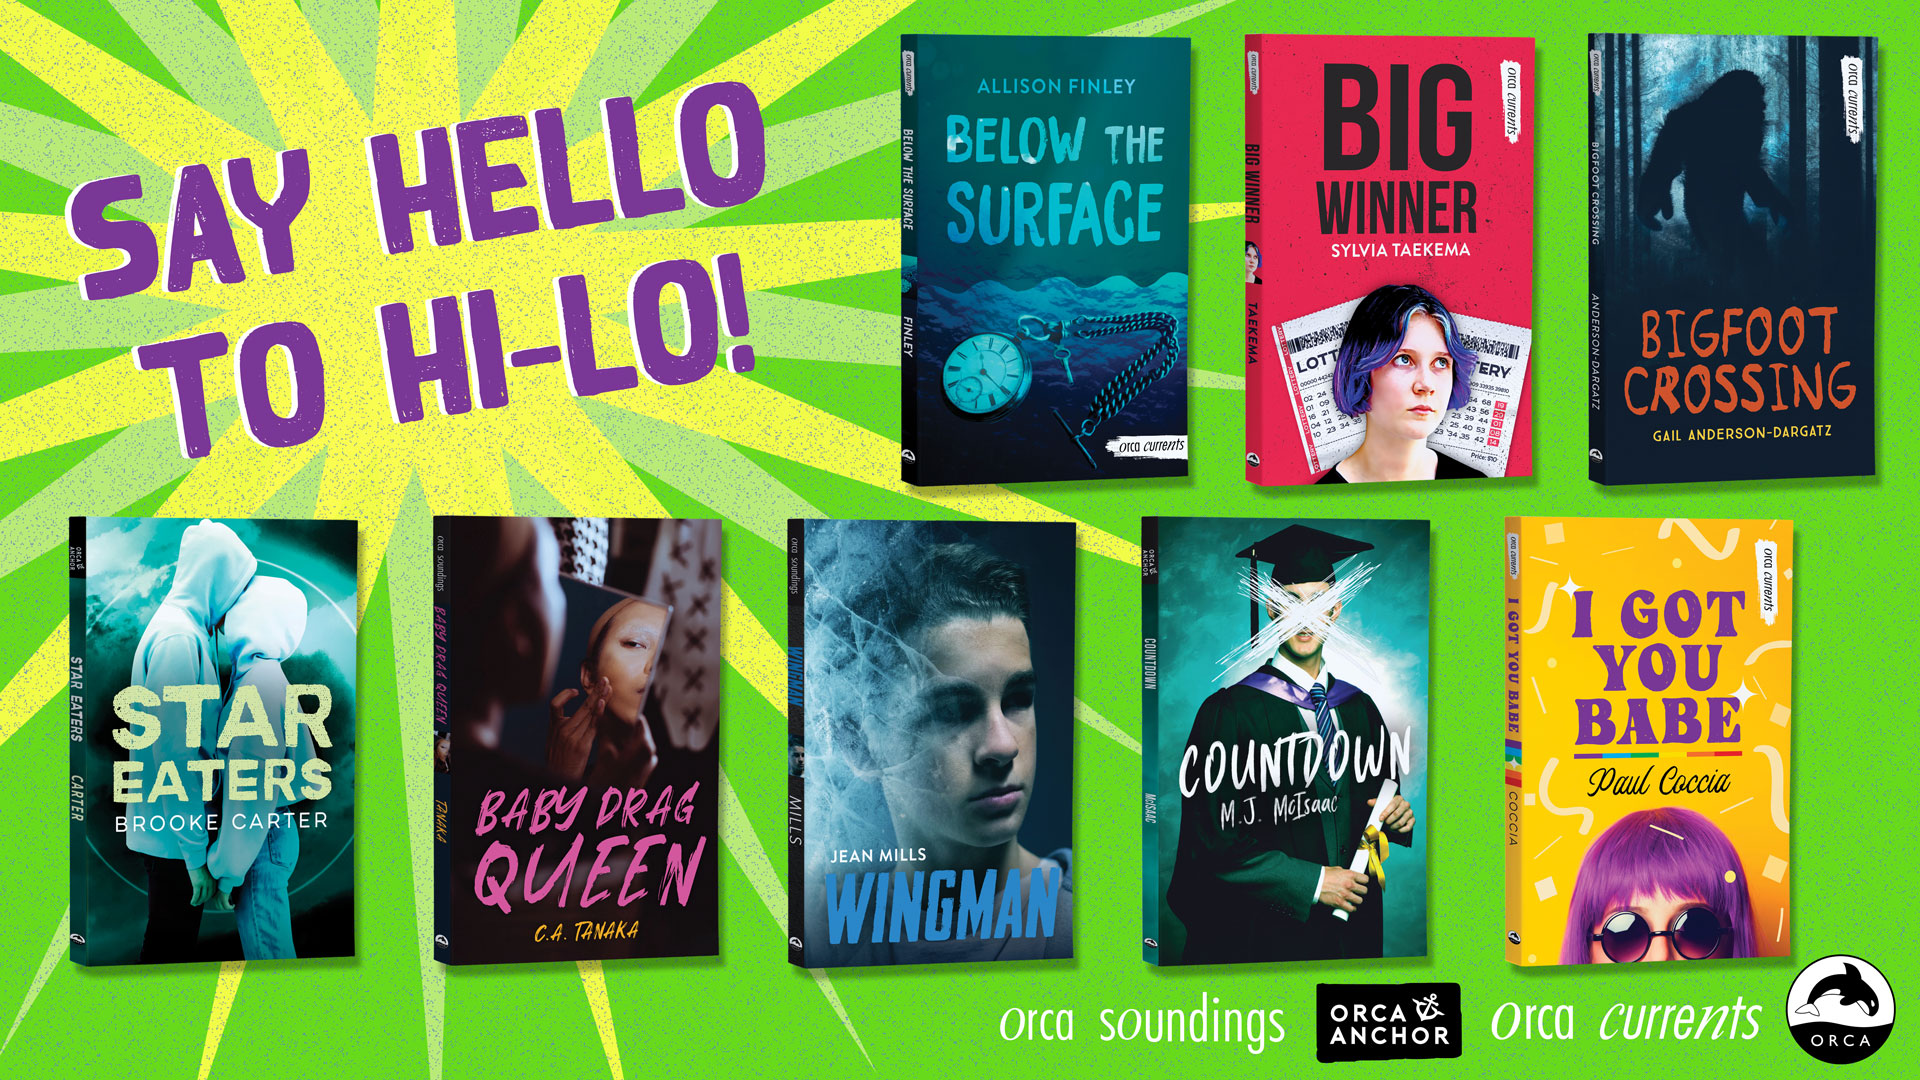 Green background with Say Hello To Hi-Lo in Purple with a yellow sunburst. 8 book covers.